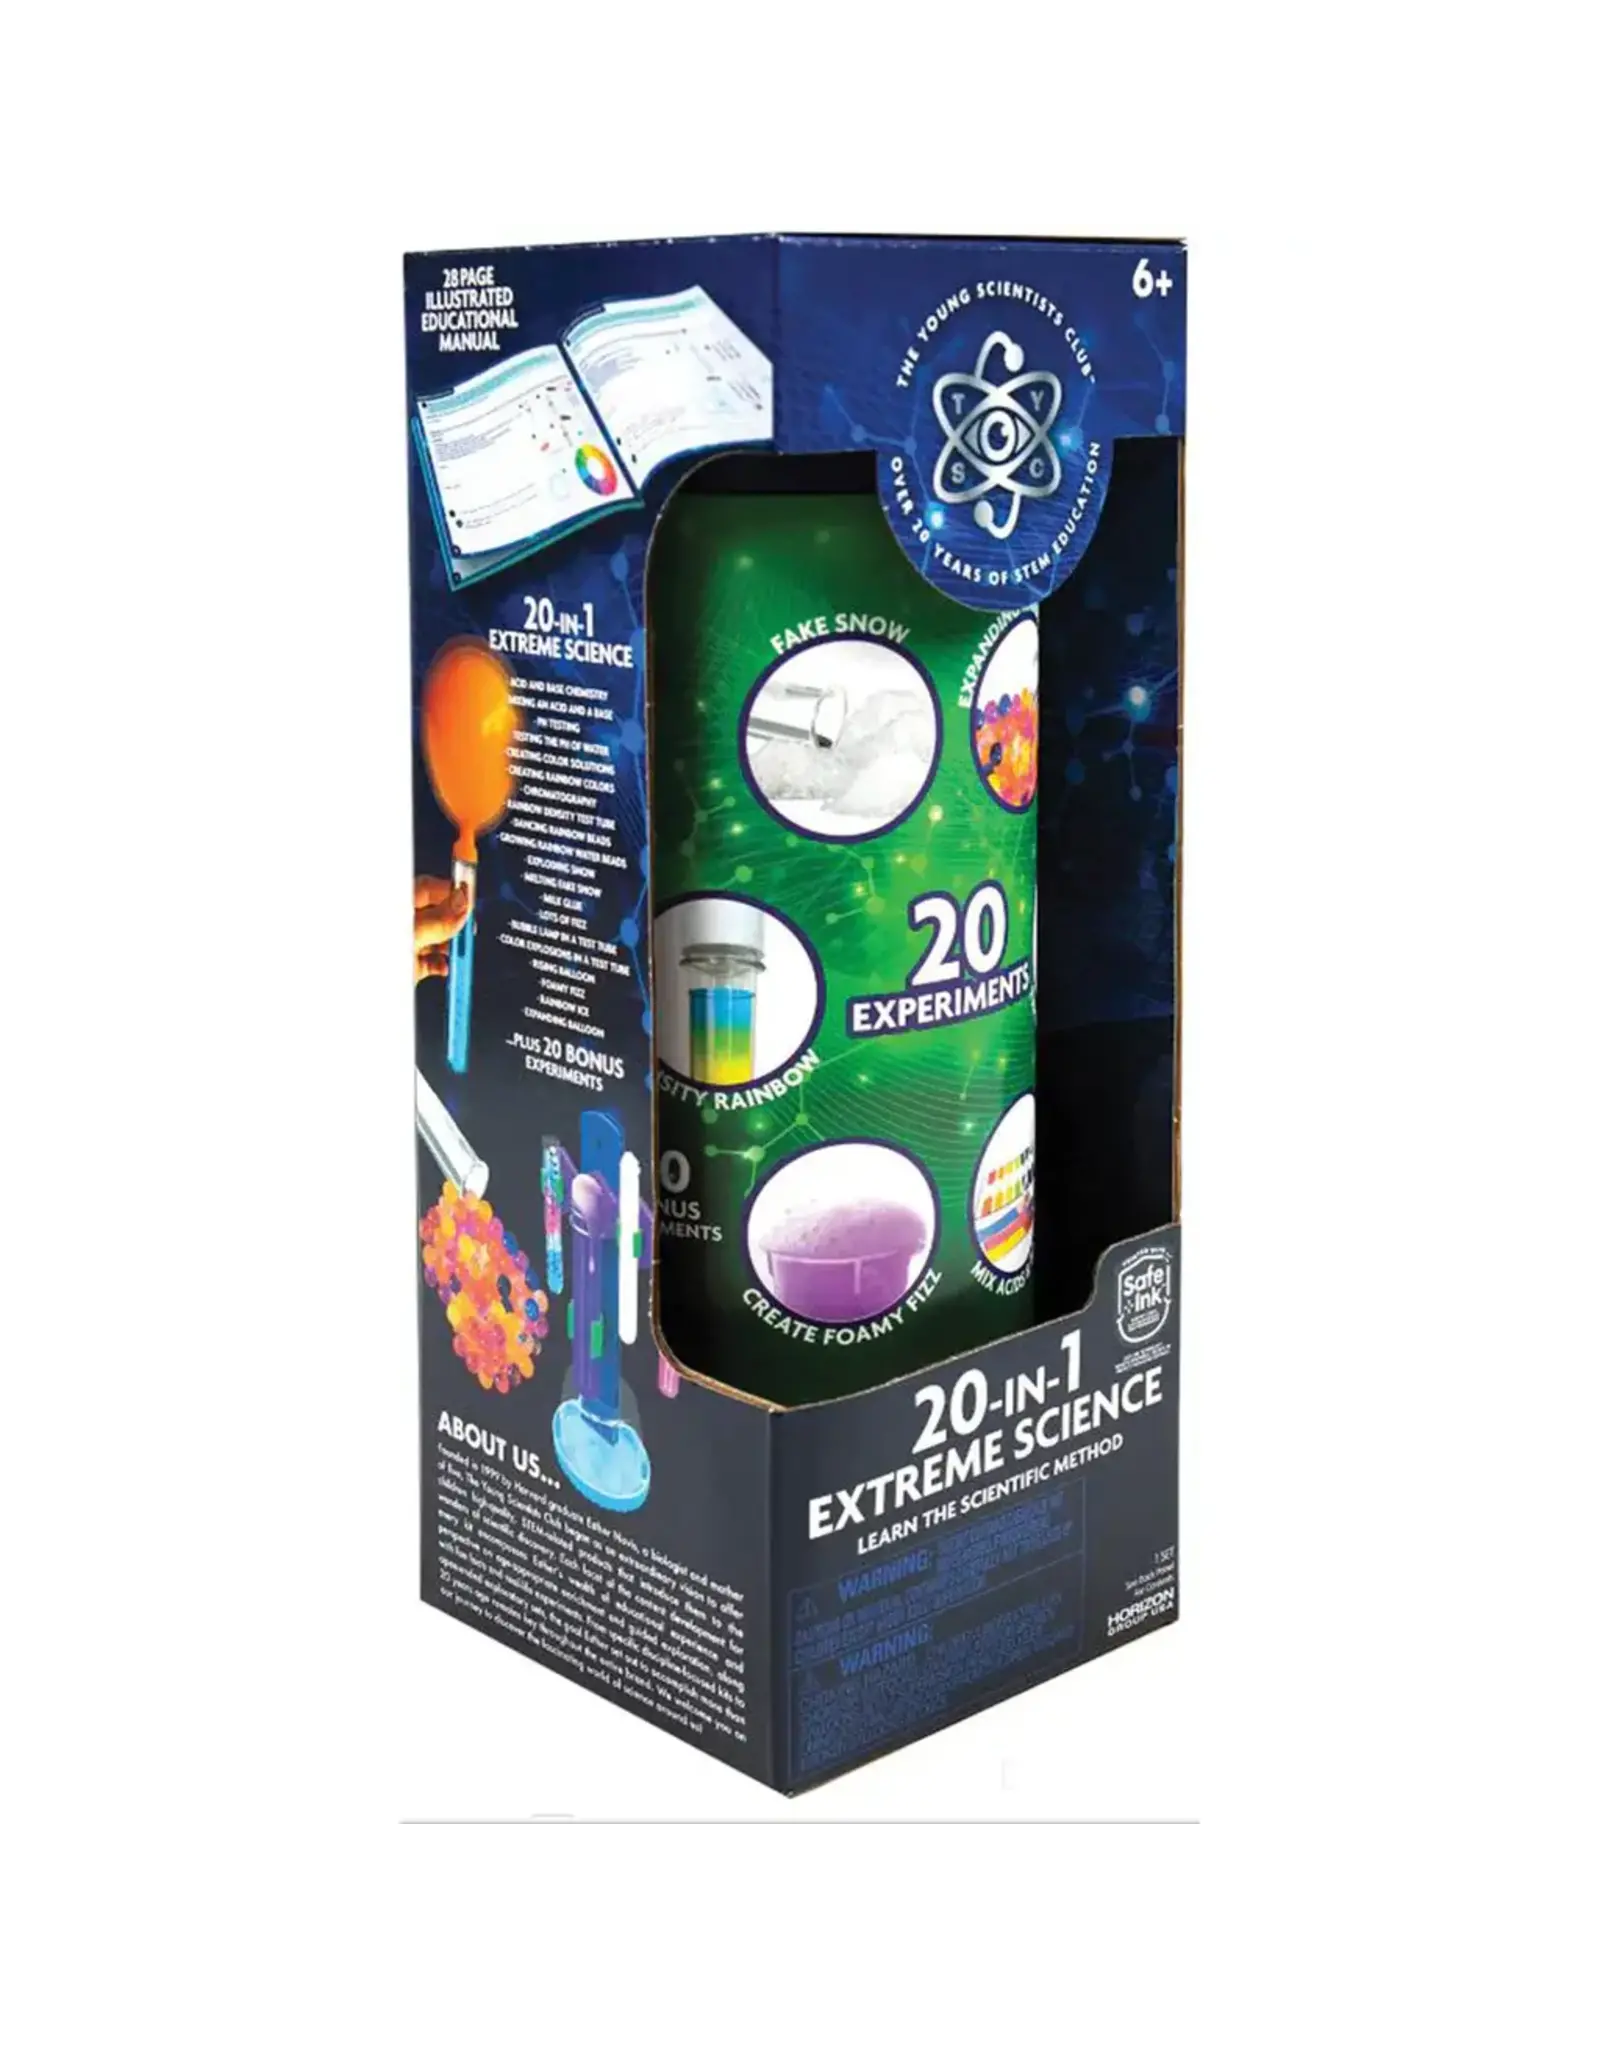 Horizon Toys The Young Scientists Club 20-in-1 Extreme Science